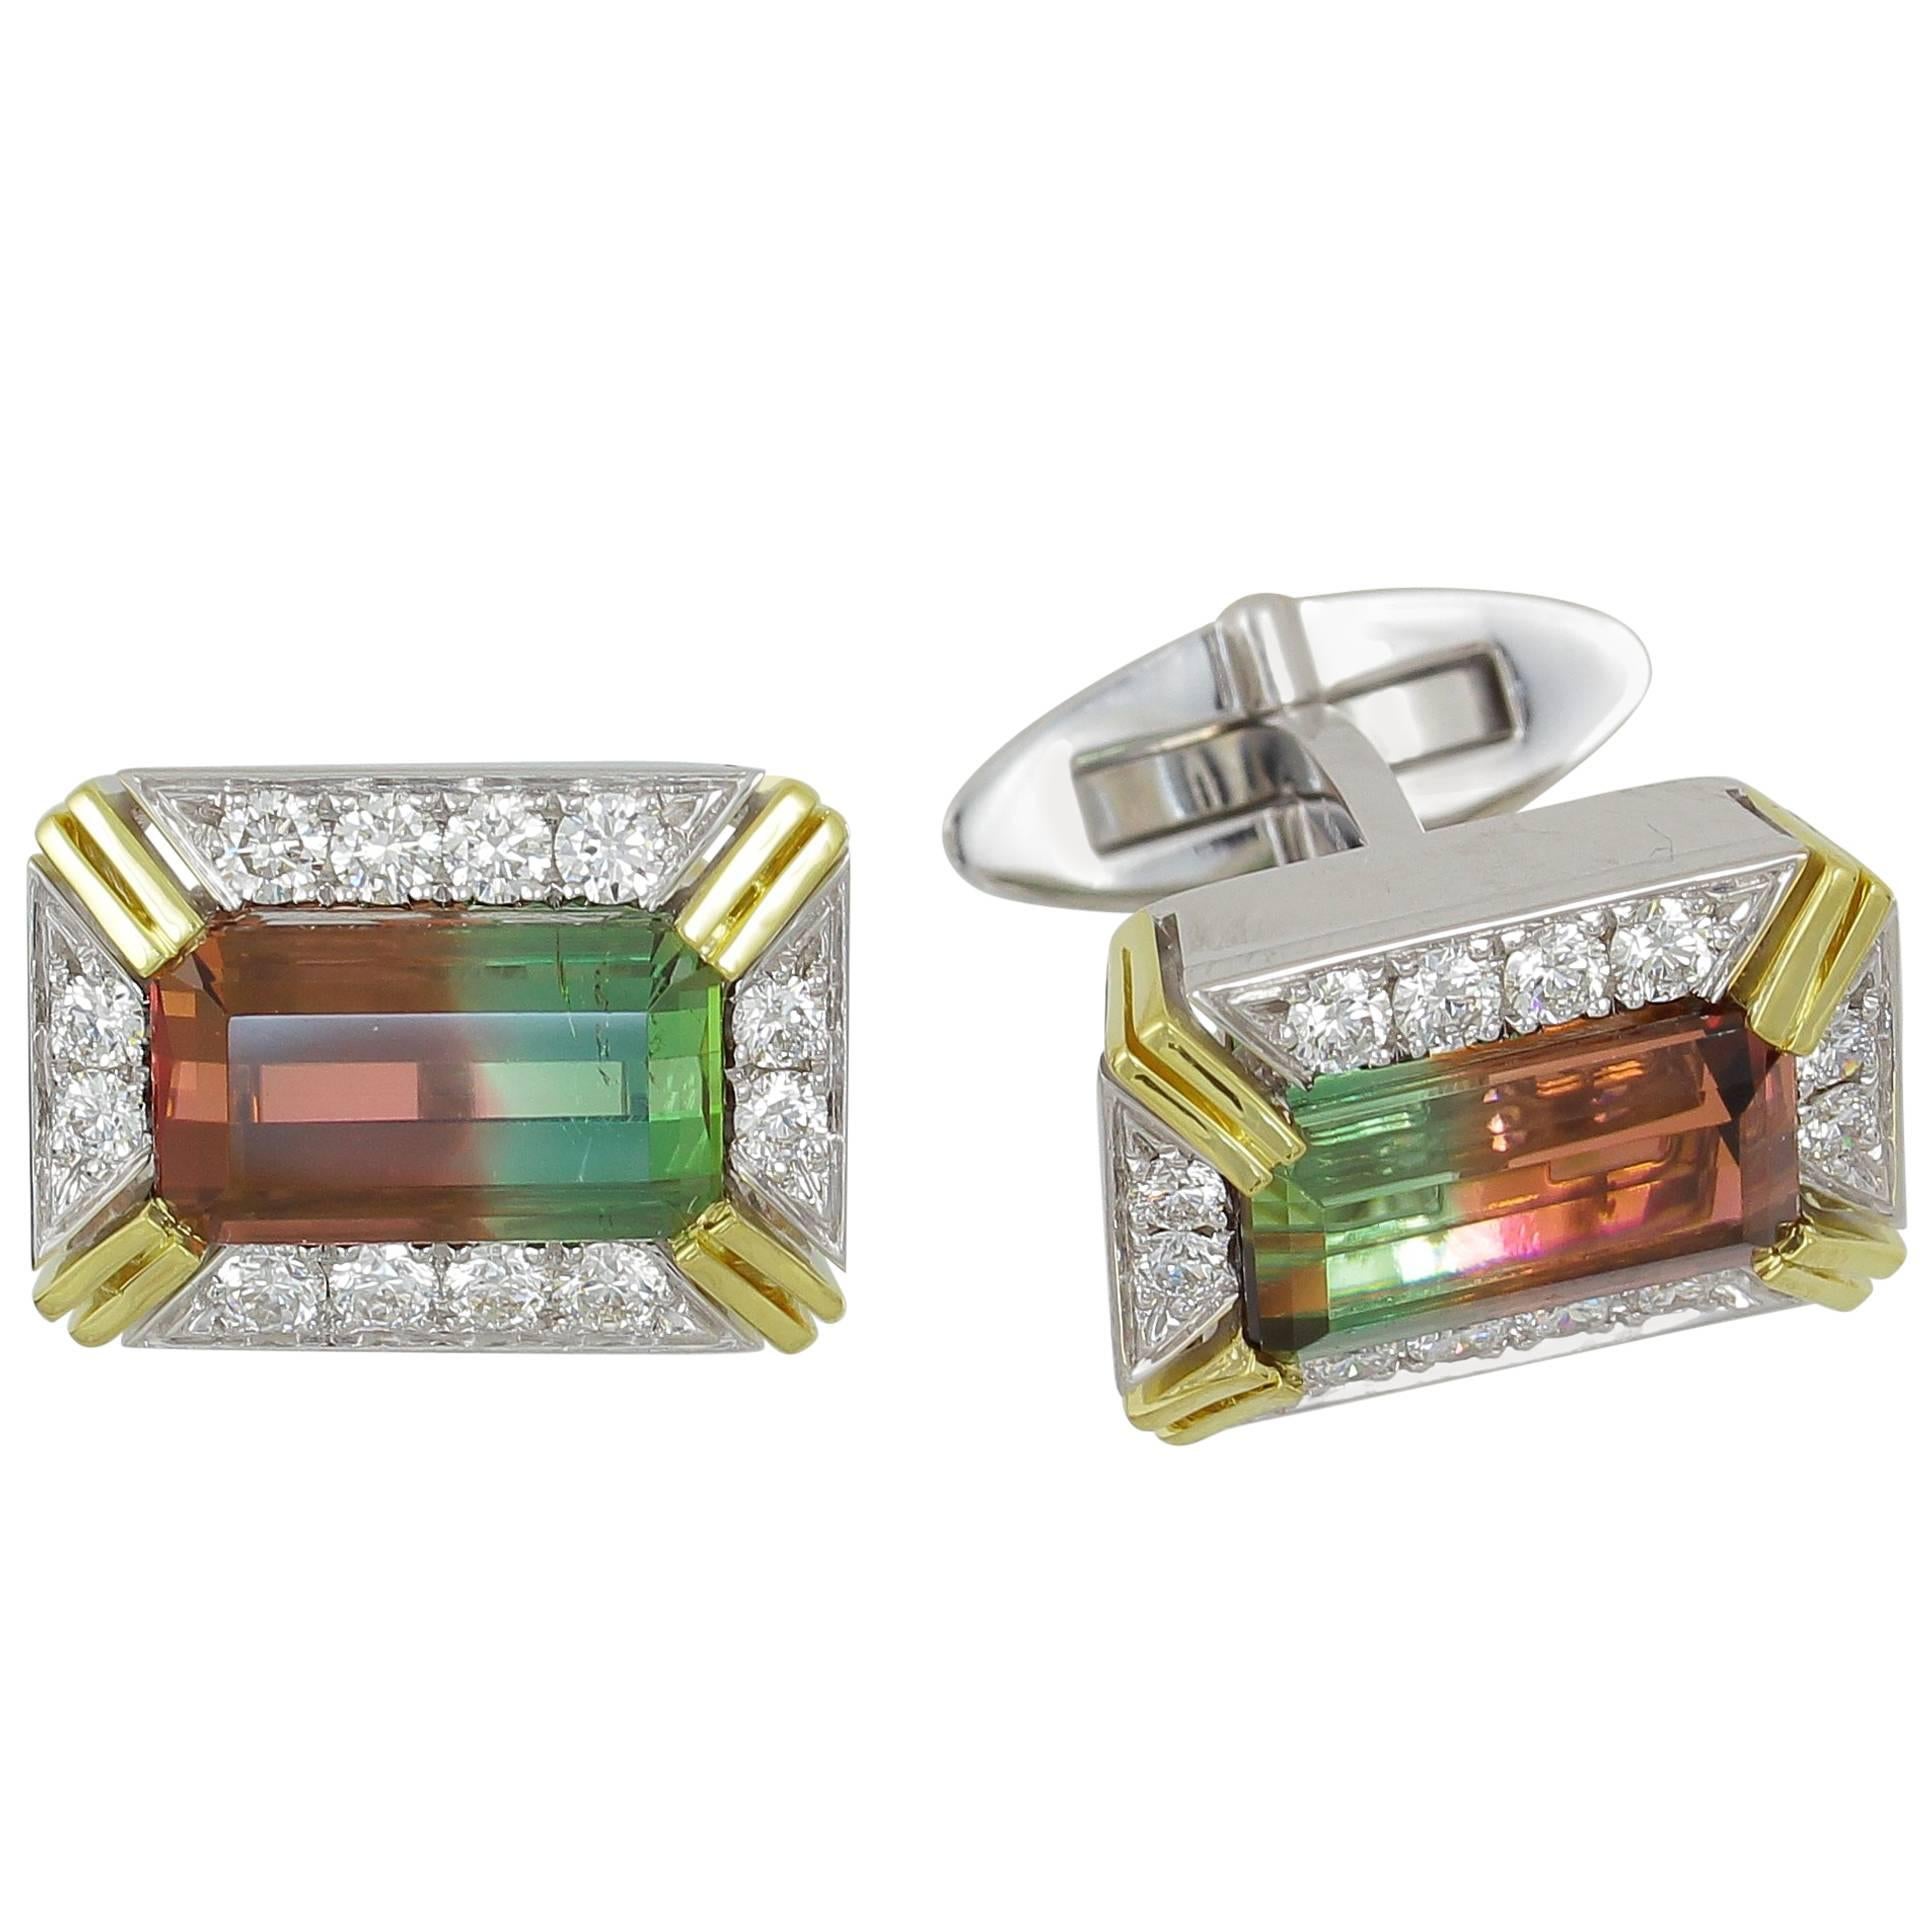 Frederic Sage 9.29 Carat Watermelon Tourmaline White and yellow gold Cufflinks For Sale